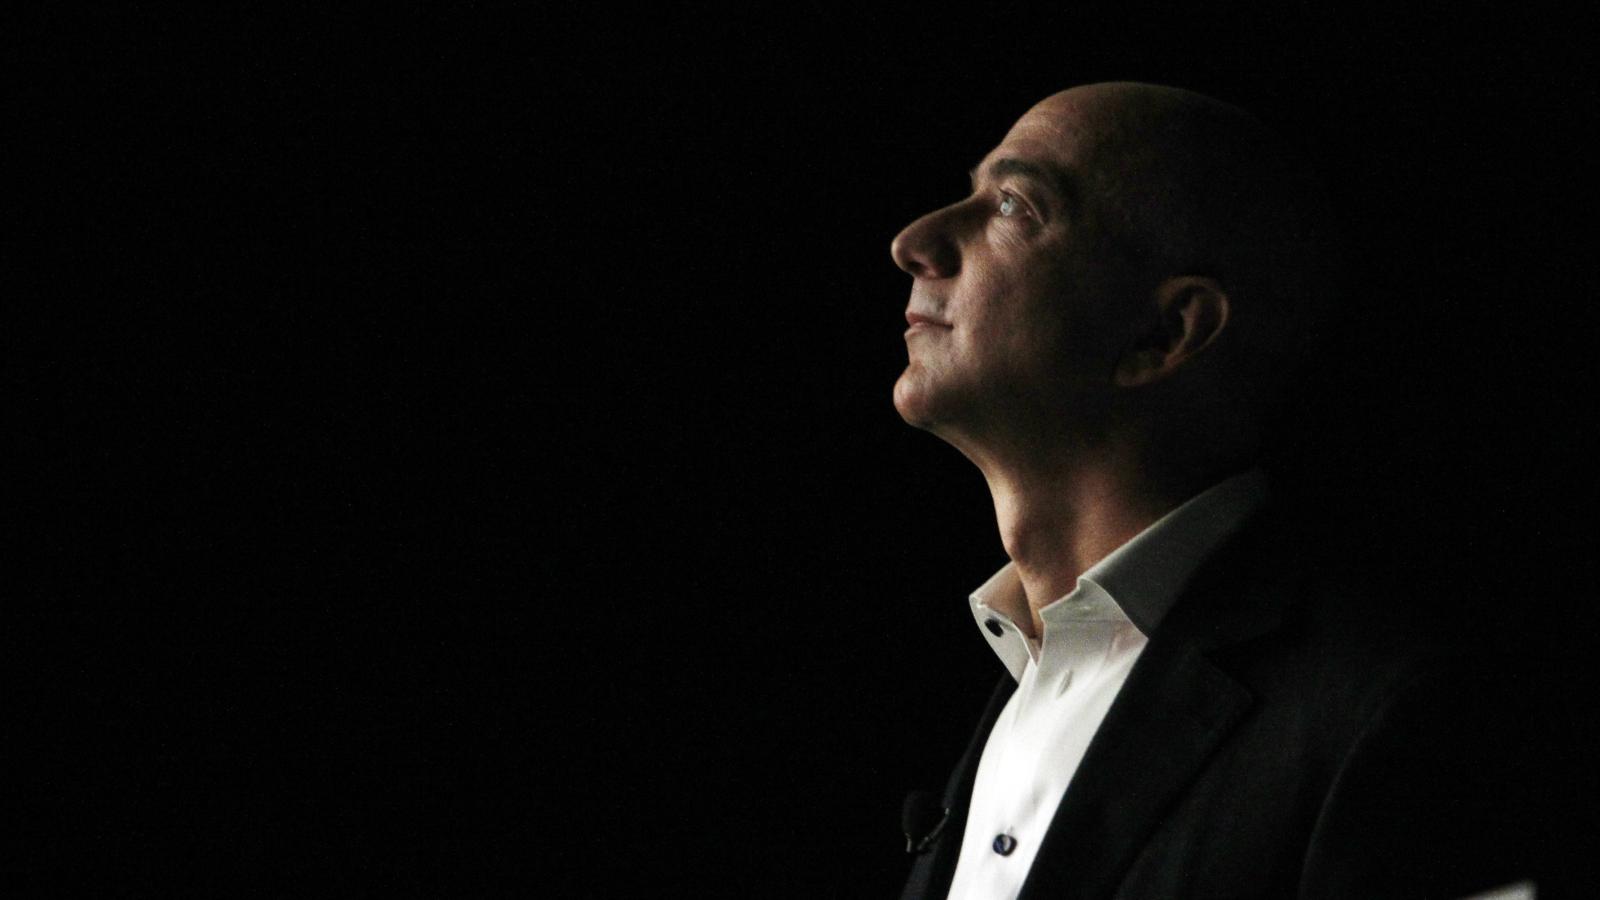 The Jeff Bezos way: How to Design Your Ideal Future